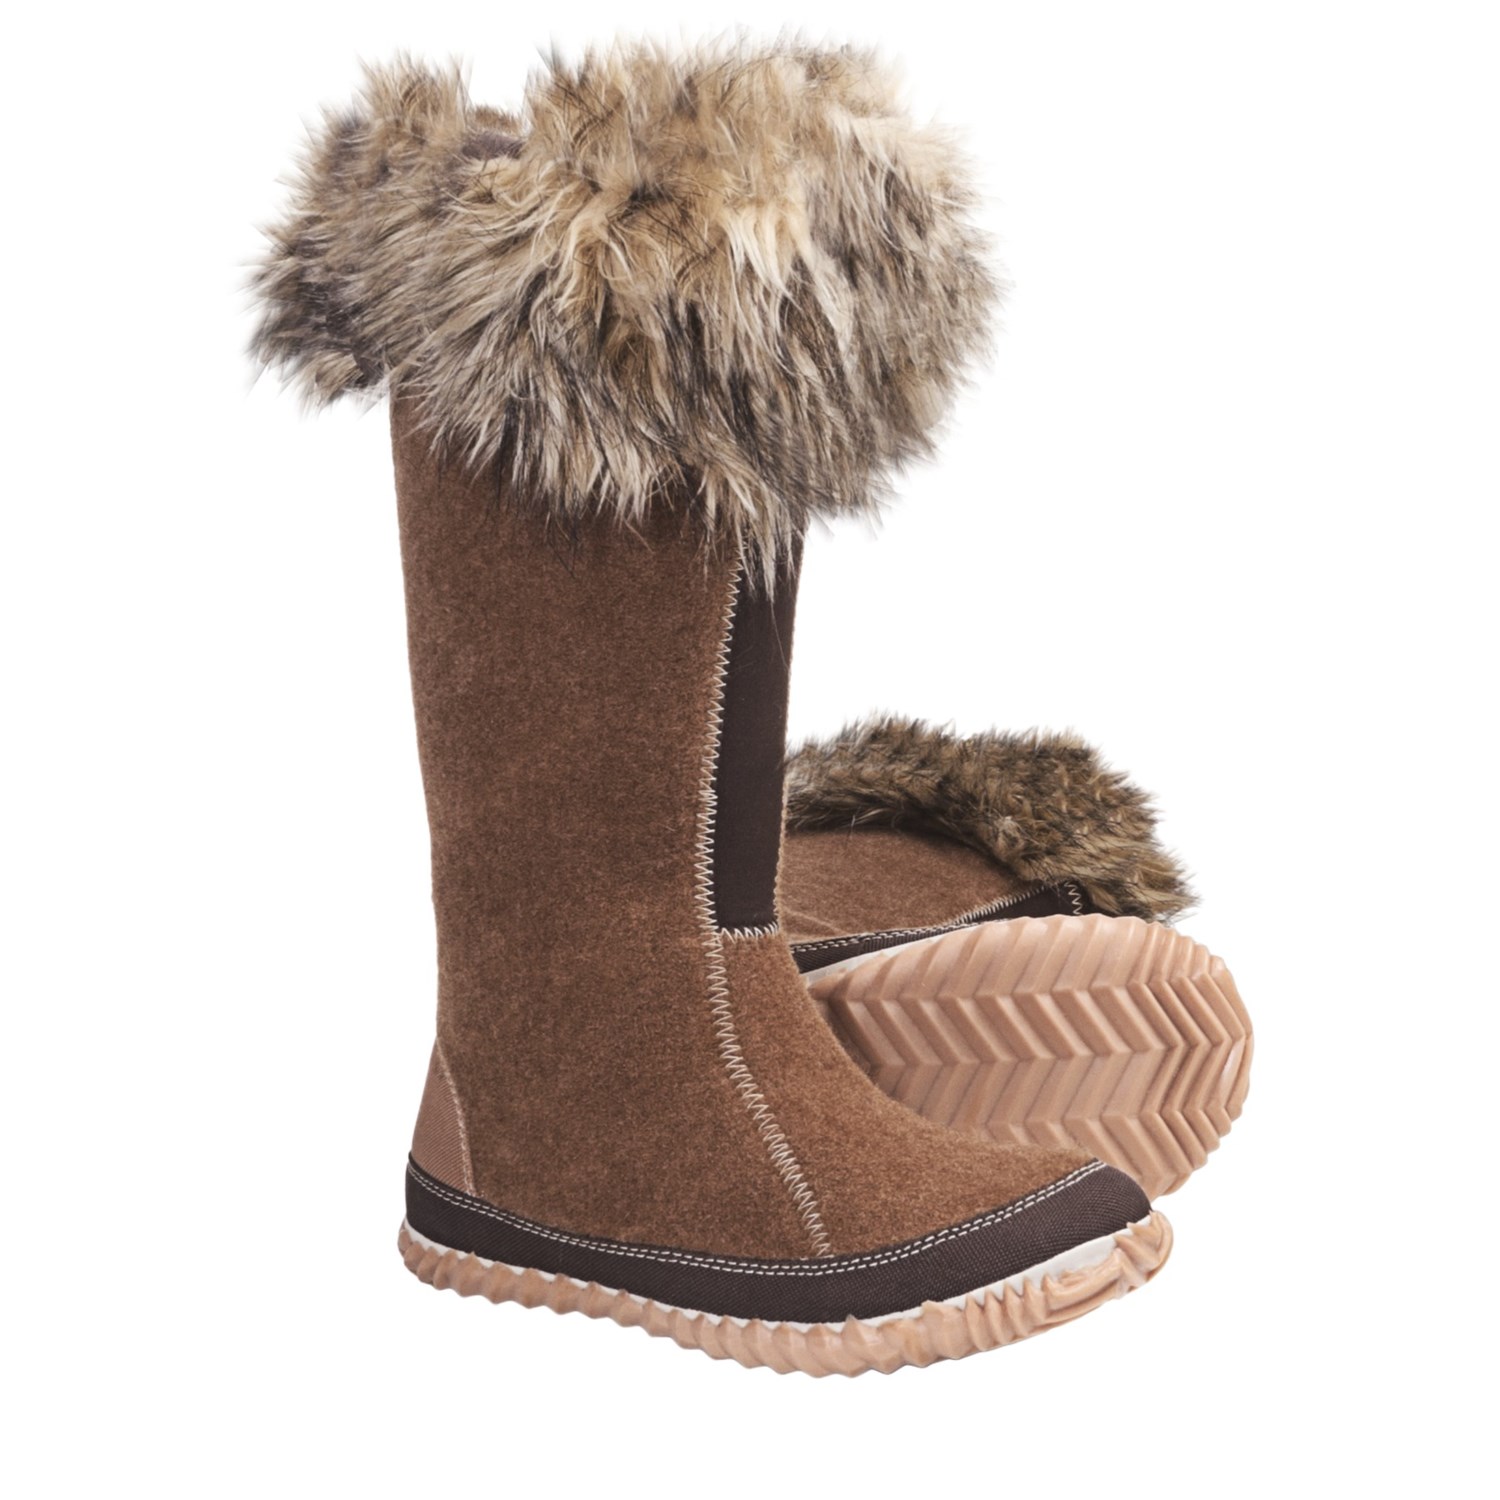 http://i.stpost.com/sorel-cozy-joan-tall-boots-recycled-felt-for-women-in-natural~p~5565a_02~1500.3.jpg